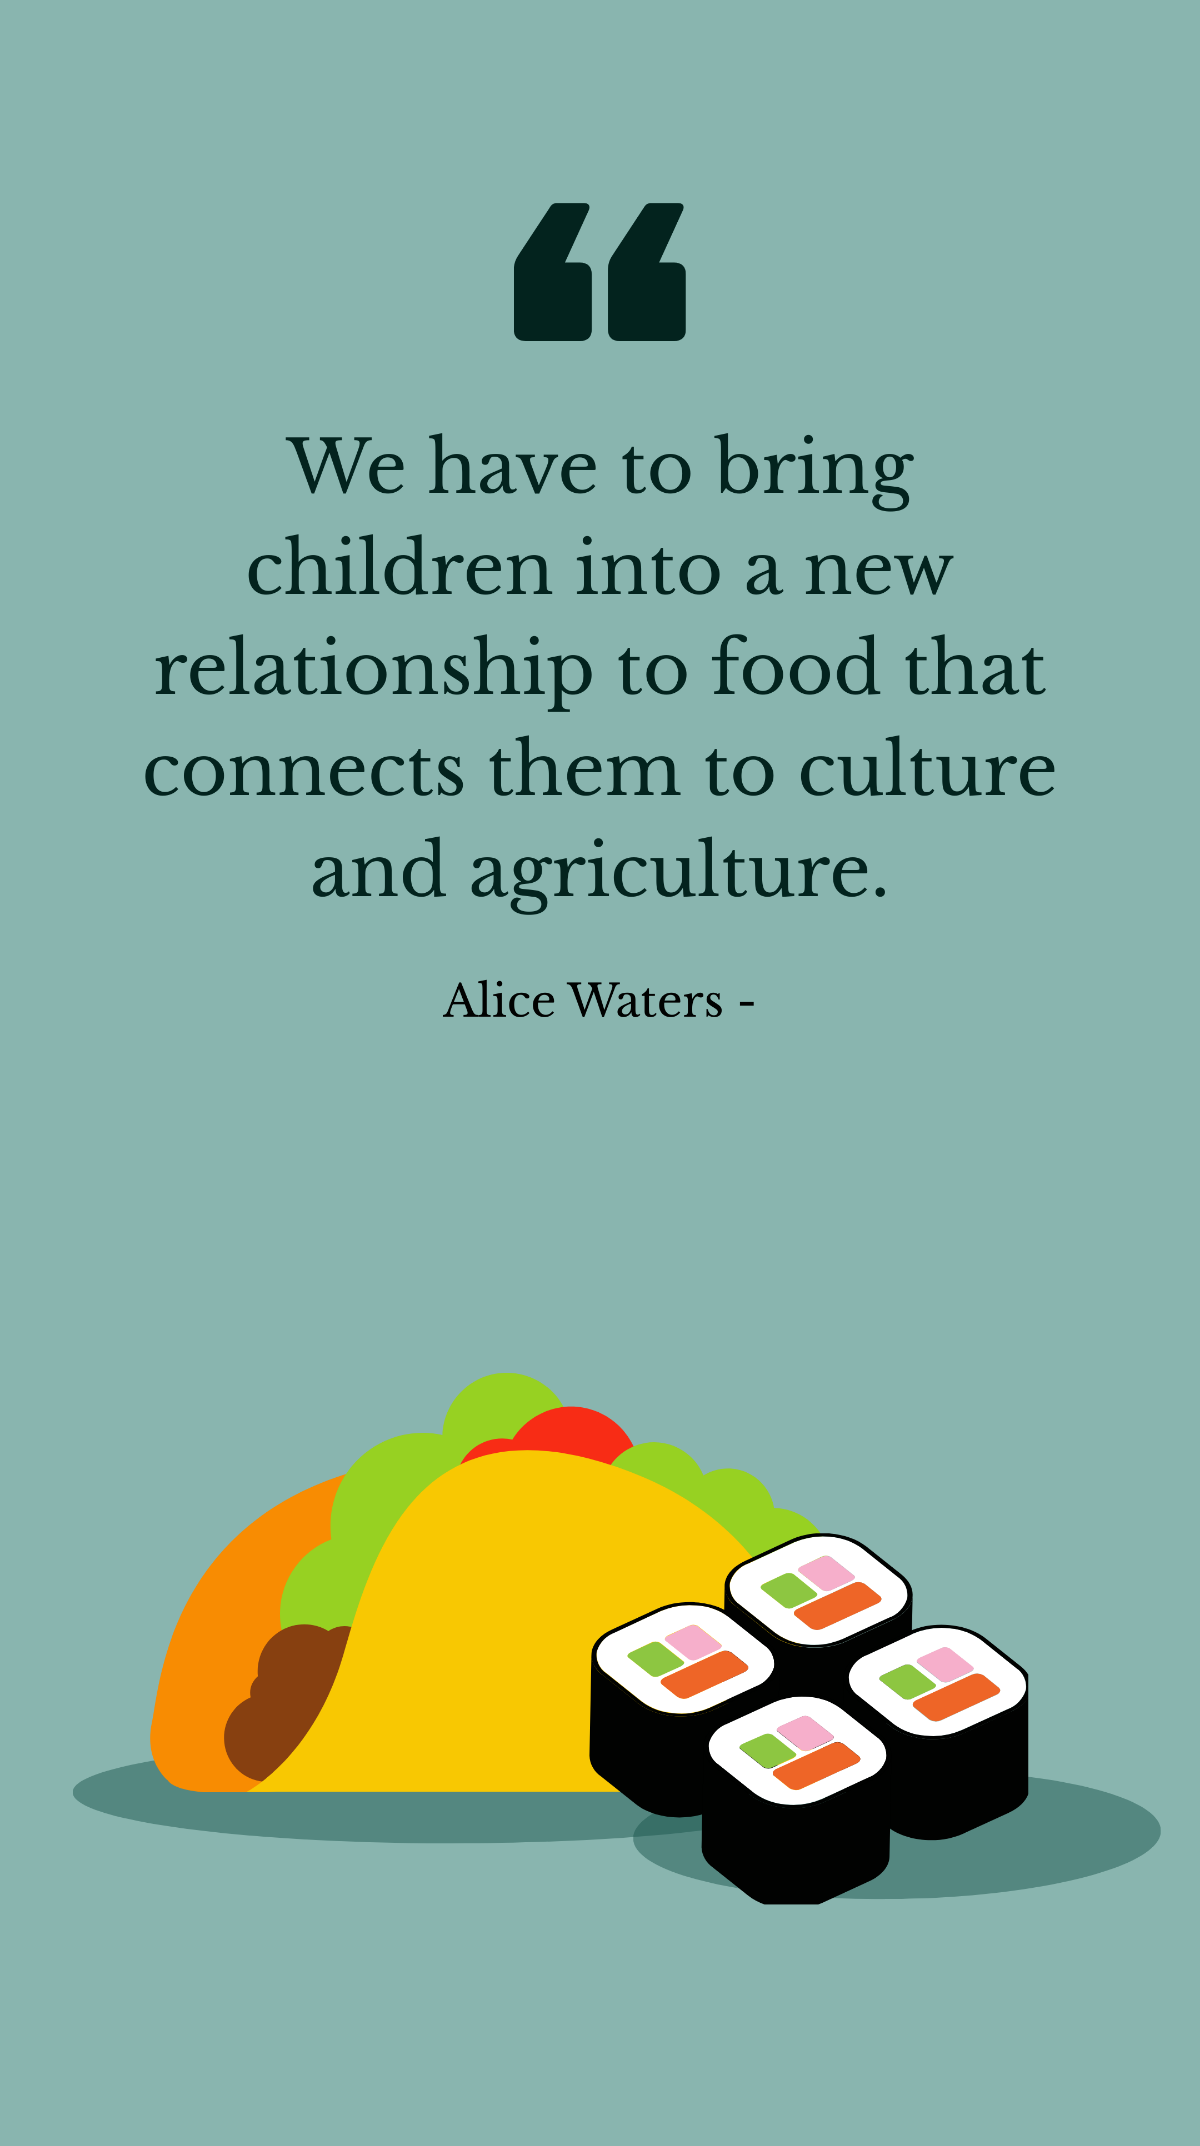 Alice Waters - We have to bring children into a new relationship to food that connects them to culture and agriculture. Template